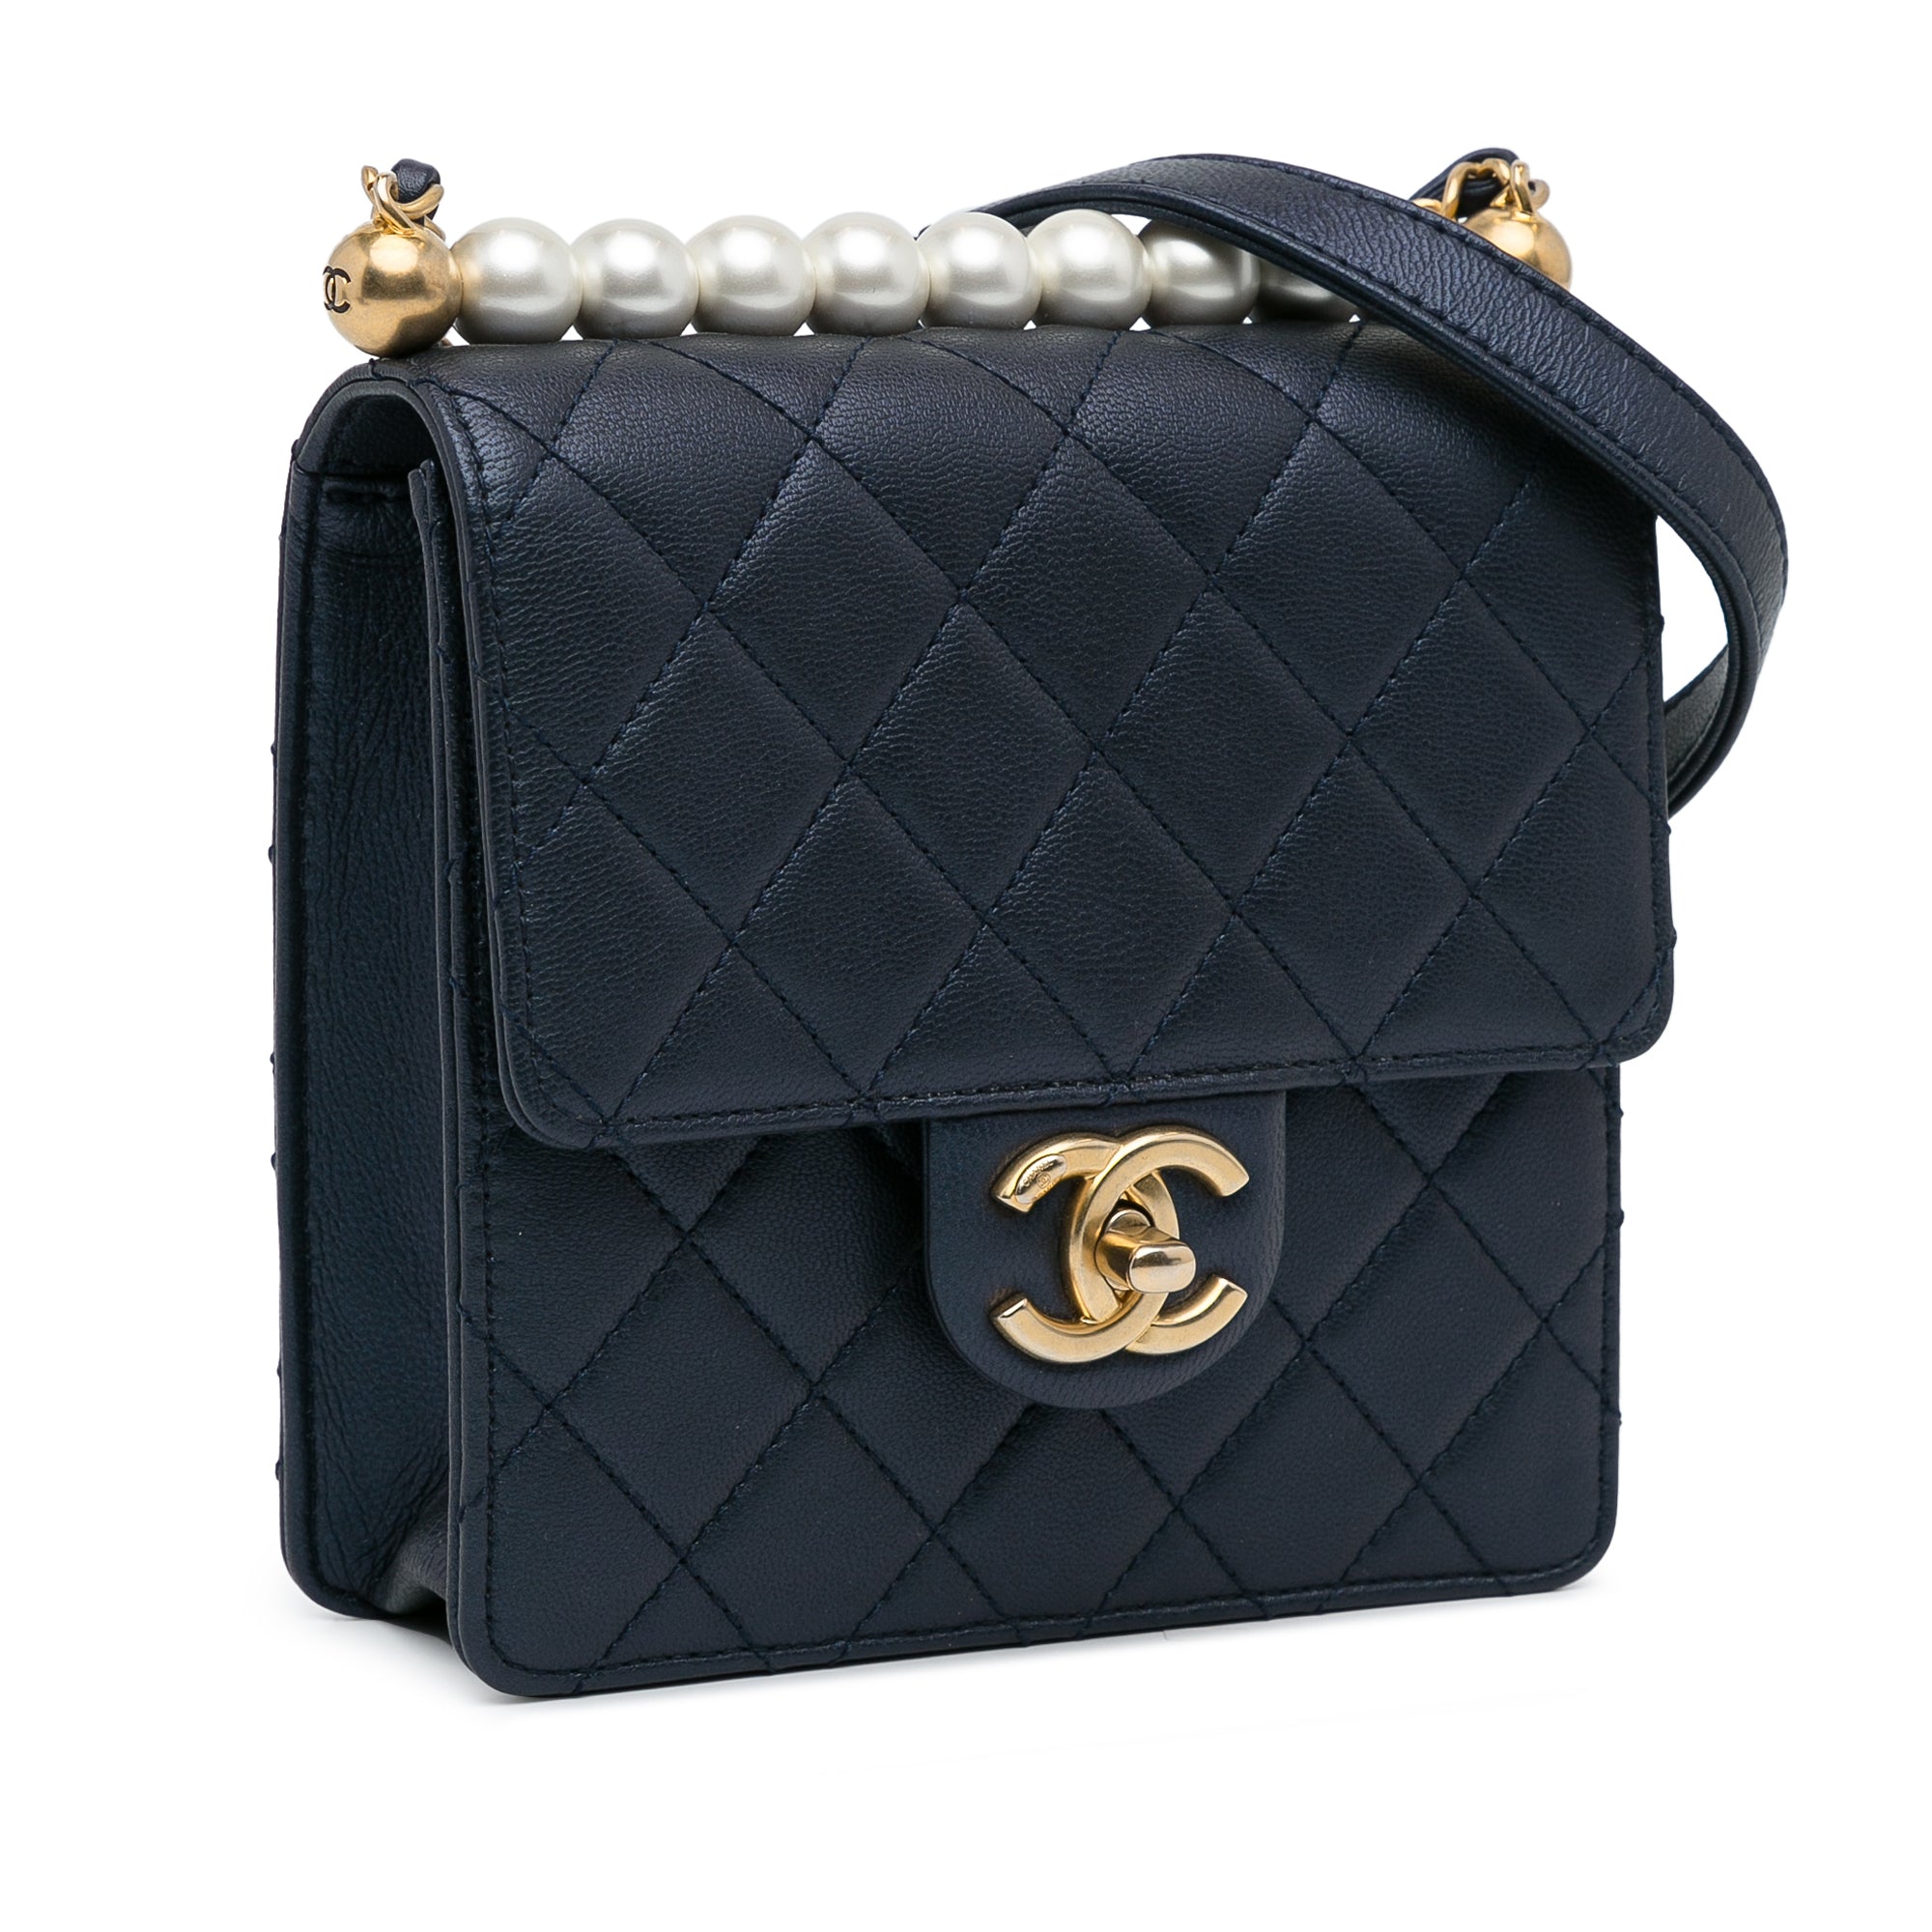 Chanel Flap Bag Chic Pearls Blue Lambskin Gold